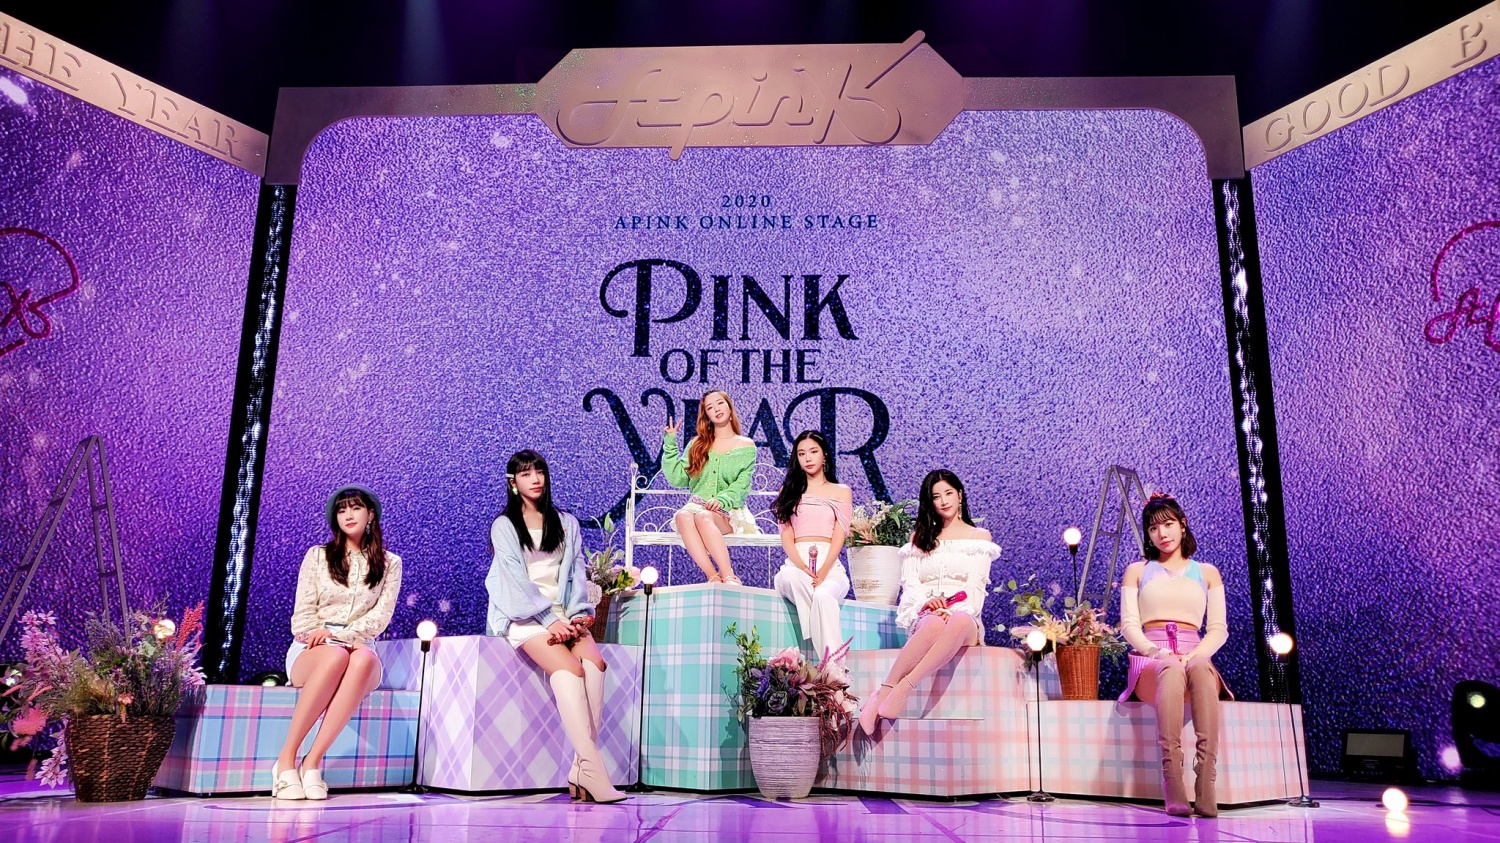 '10 Years' Apink, online performances "Communication only for a long time"